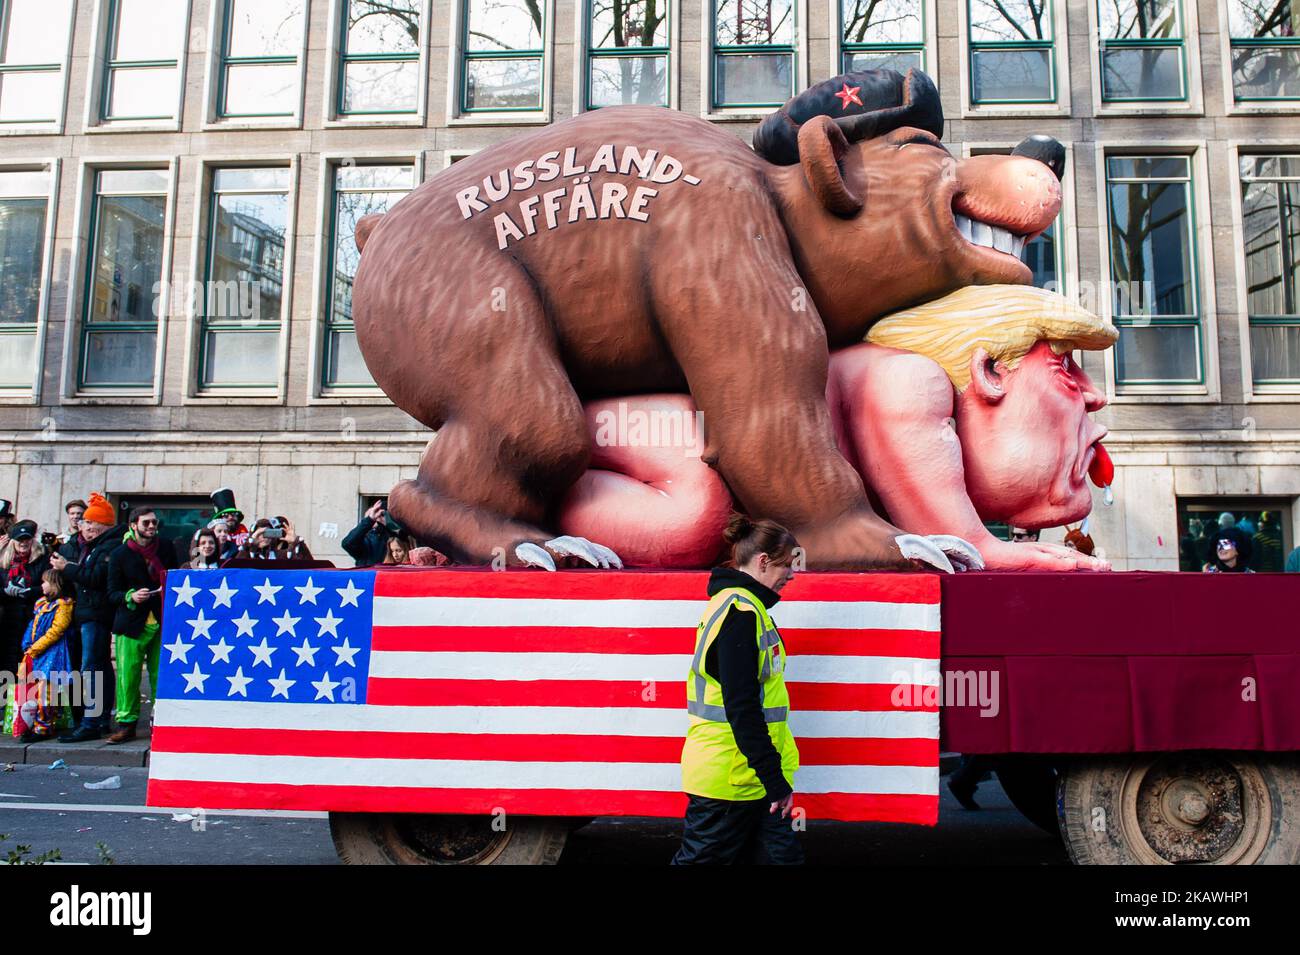 A float featuring US President Donald Trump and a russian bear is seen during the annual Rose Monday parade on February 12, 2018 in Dusseldorf, Germany. Political satire is a traditional cornerstone of the annual parades. More than 30 music ensembles and 5,000 participants join the procession through the city. Elaborately built and decorated floats address cultural and political issues and can be satirical, hilarious and even controversial. The politically themed floats of satirist Jacques Tilly are famous the world over. (Photo by Romy Arroyo Fernandez/NurPhoto) Stock Photo